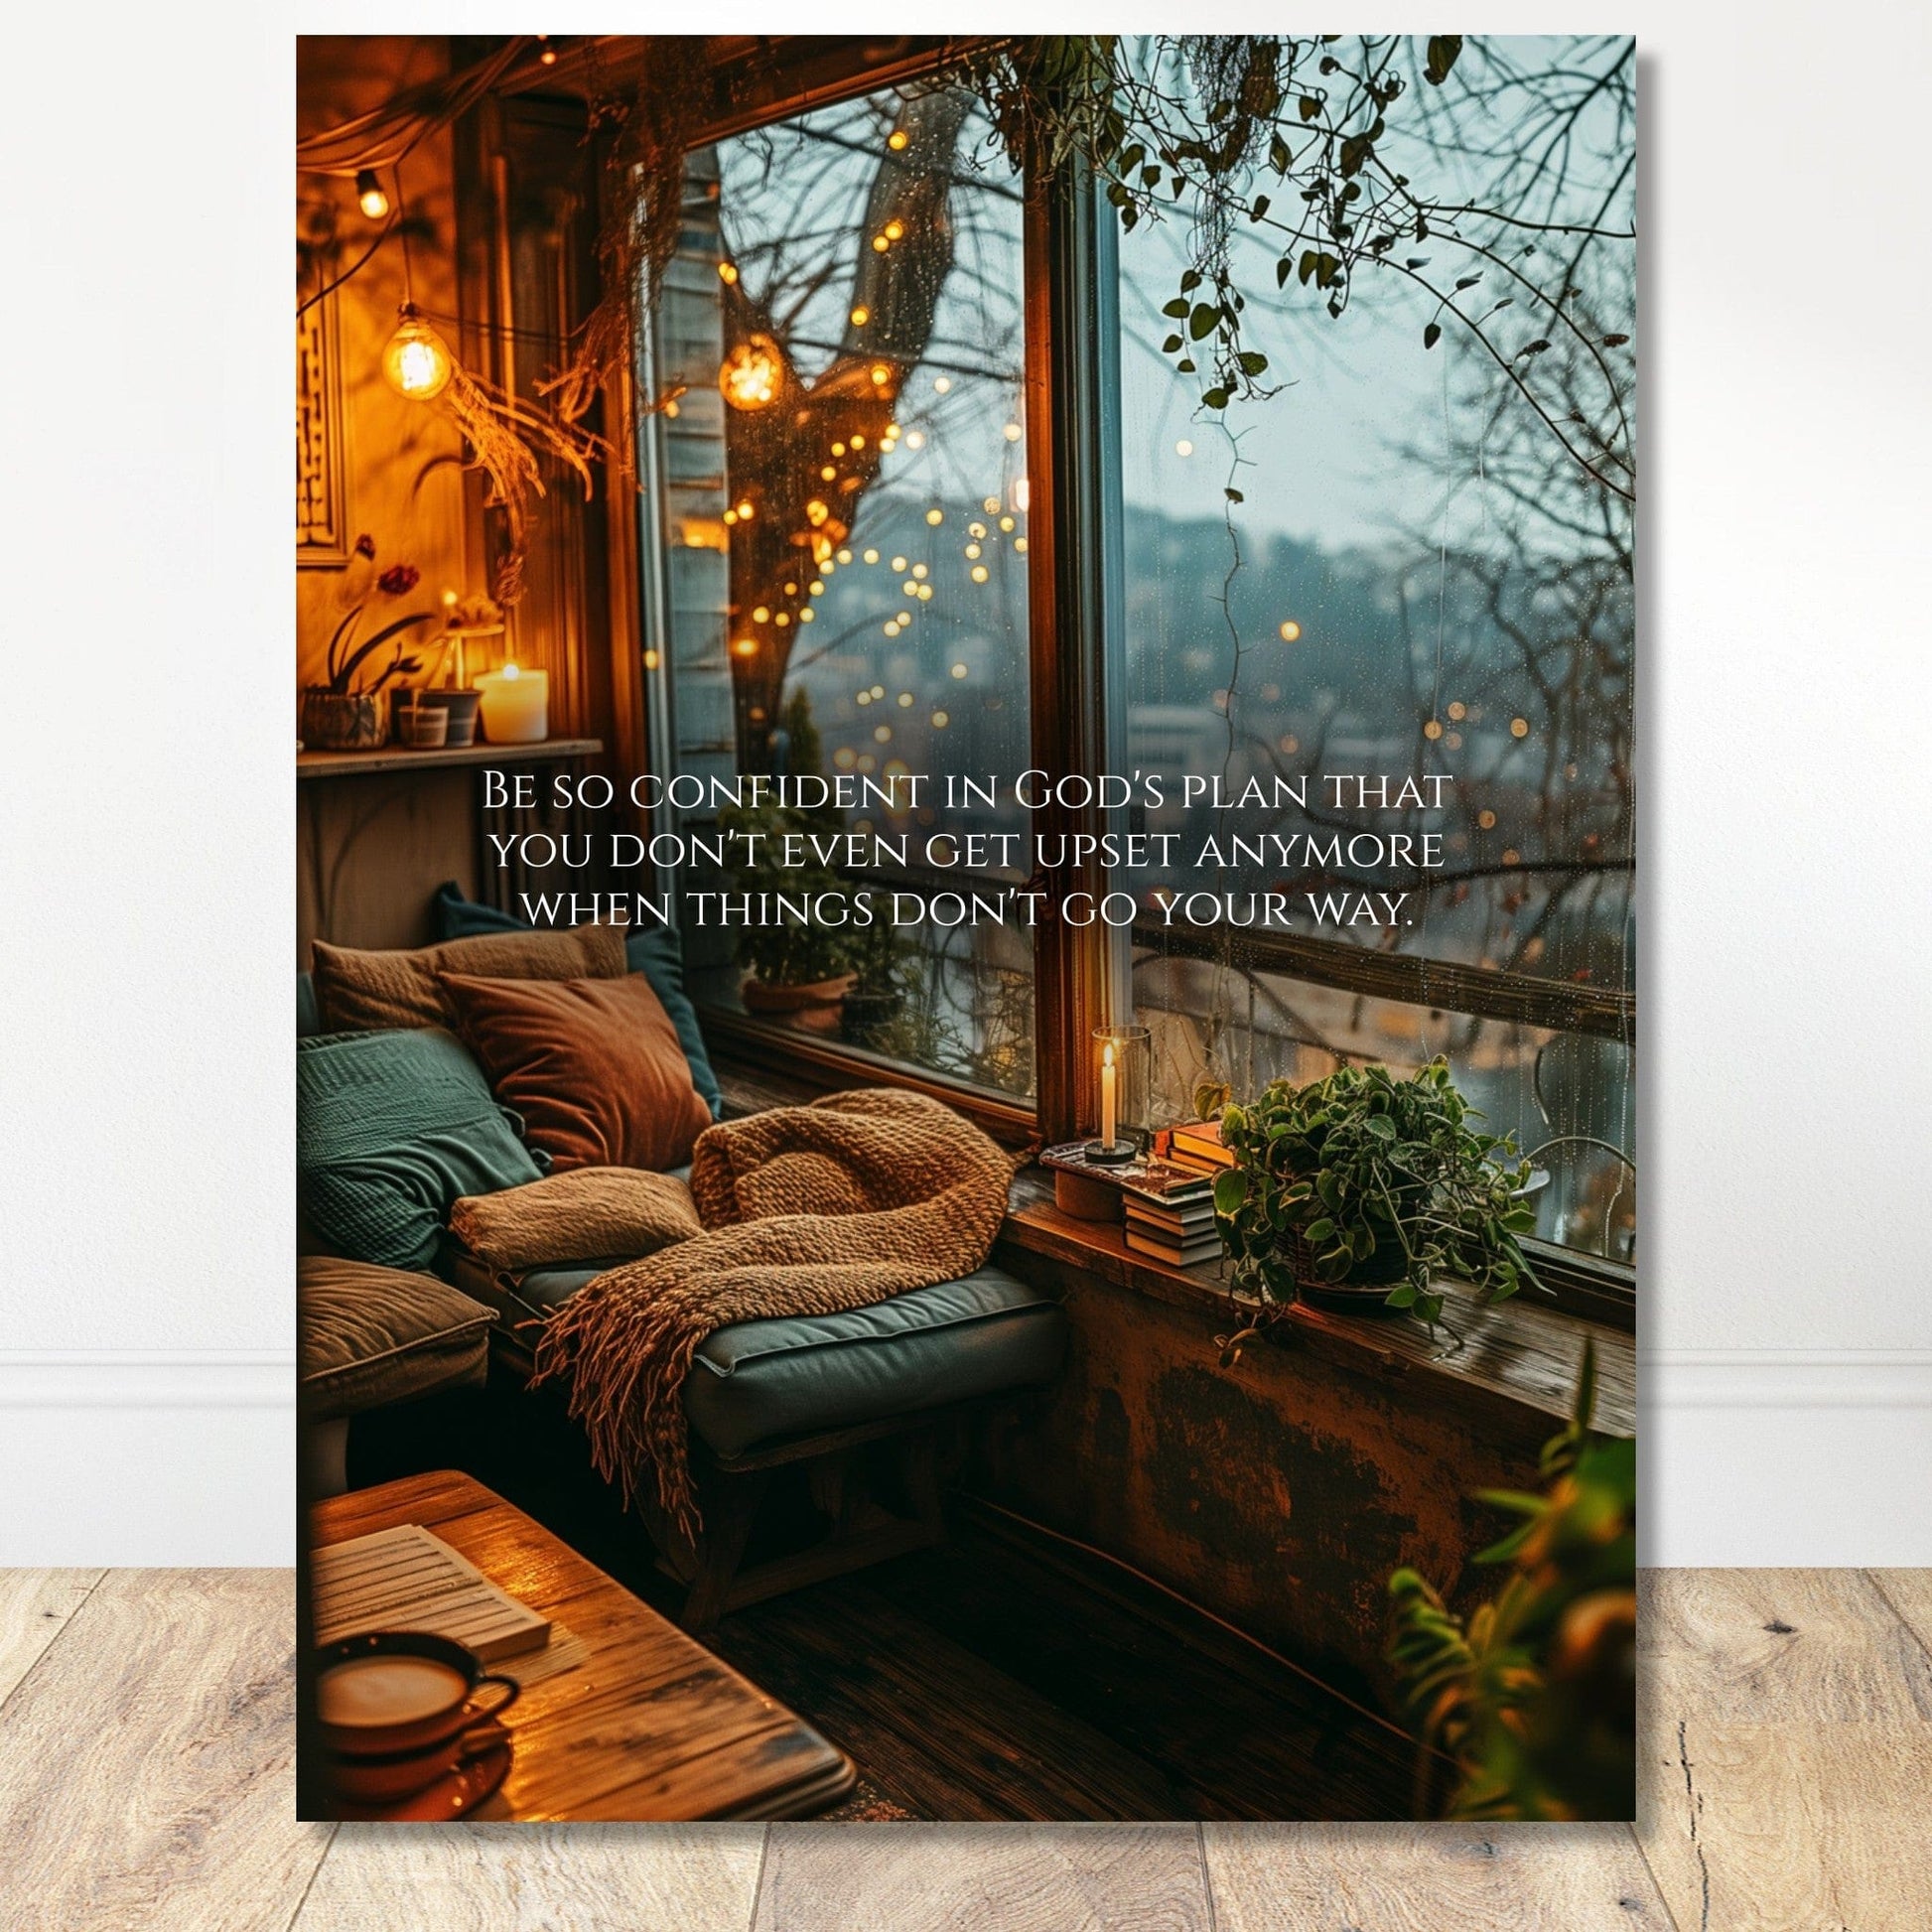 Coffee With My Father Print Material 30x40 cm / 12x16″ / Premium Matte Paper Poster / - Premium Matte Paper Wooden Framed Poster